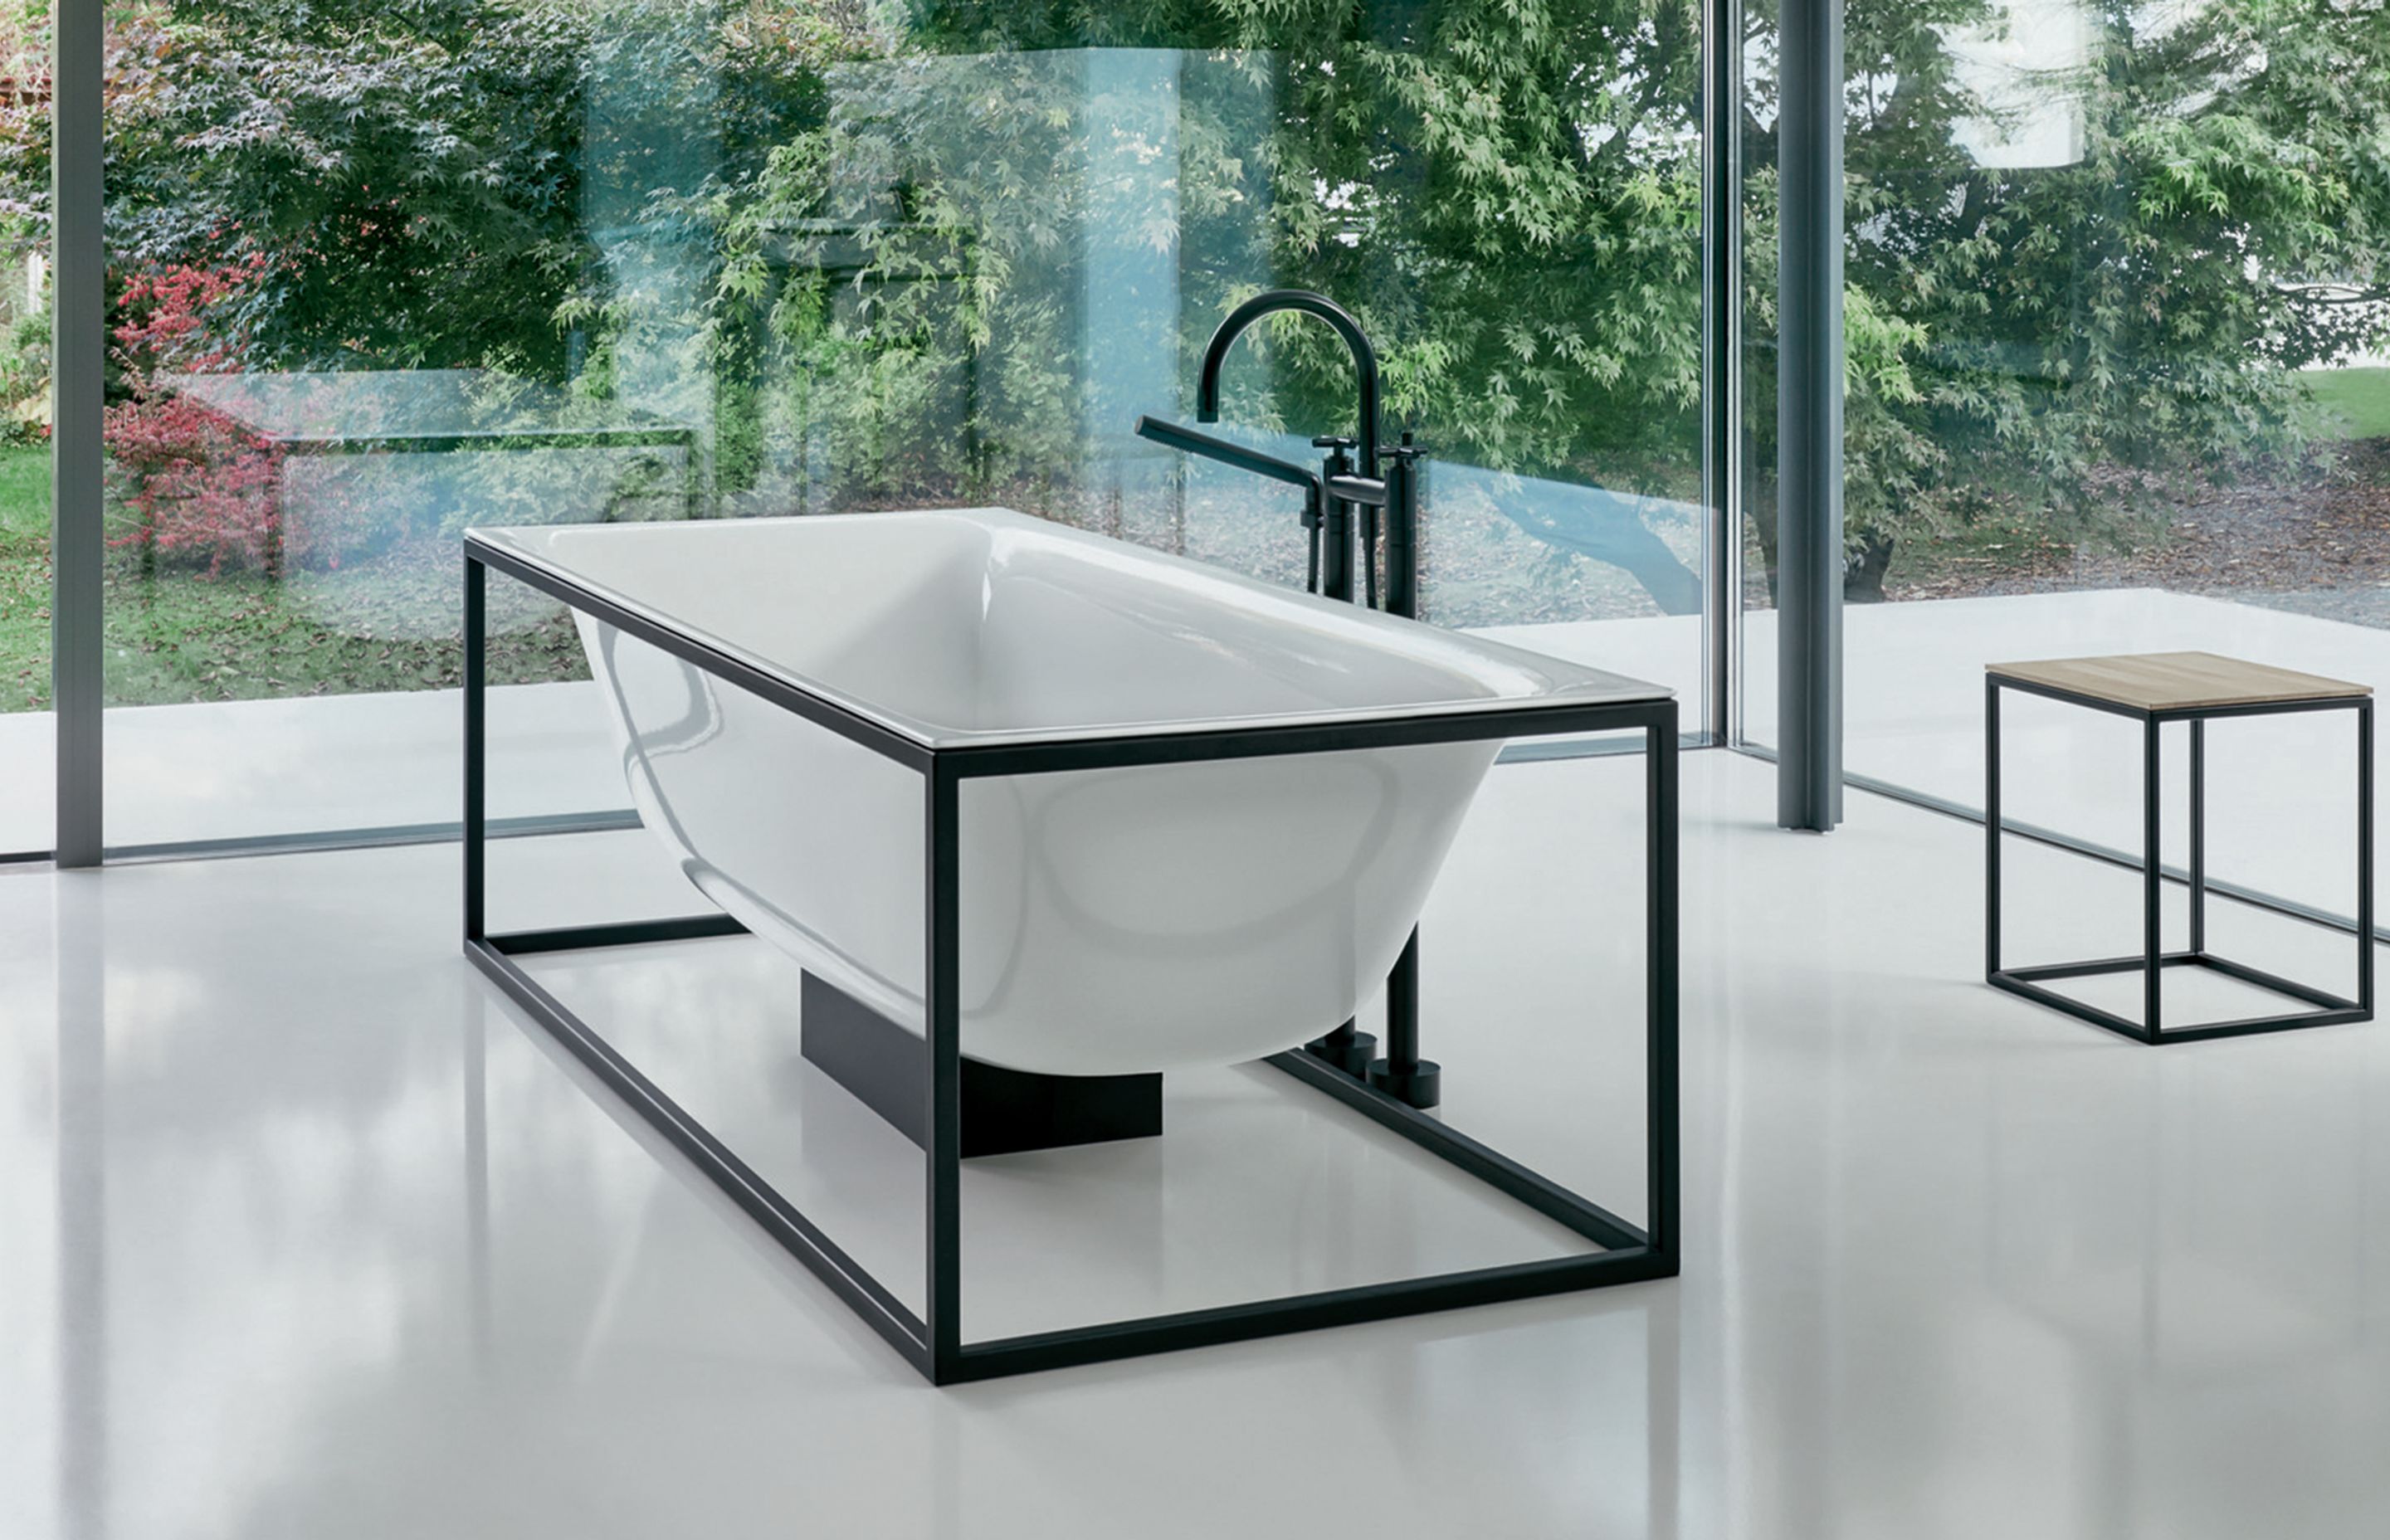 The powder-coated steel frame of the BetteLux Shape Freestanding Bath from Franklins is an artistic addition to the modern bath.